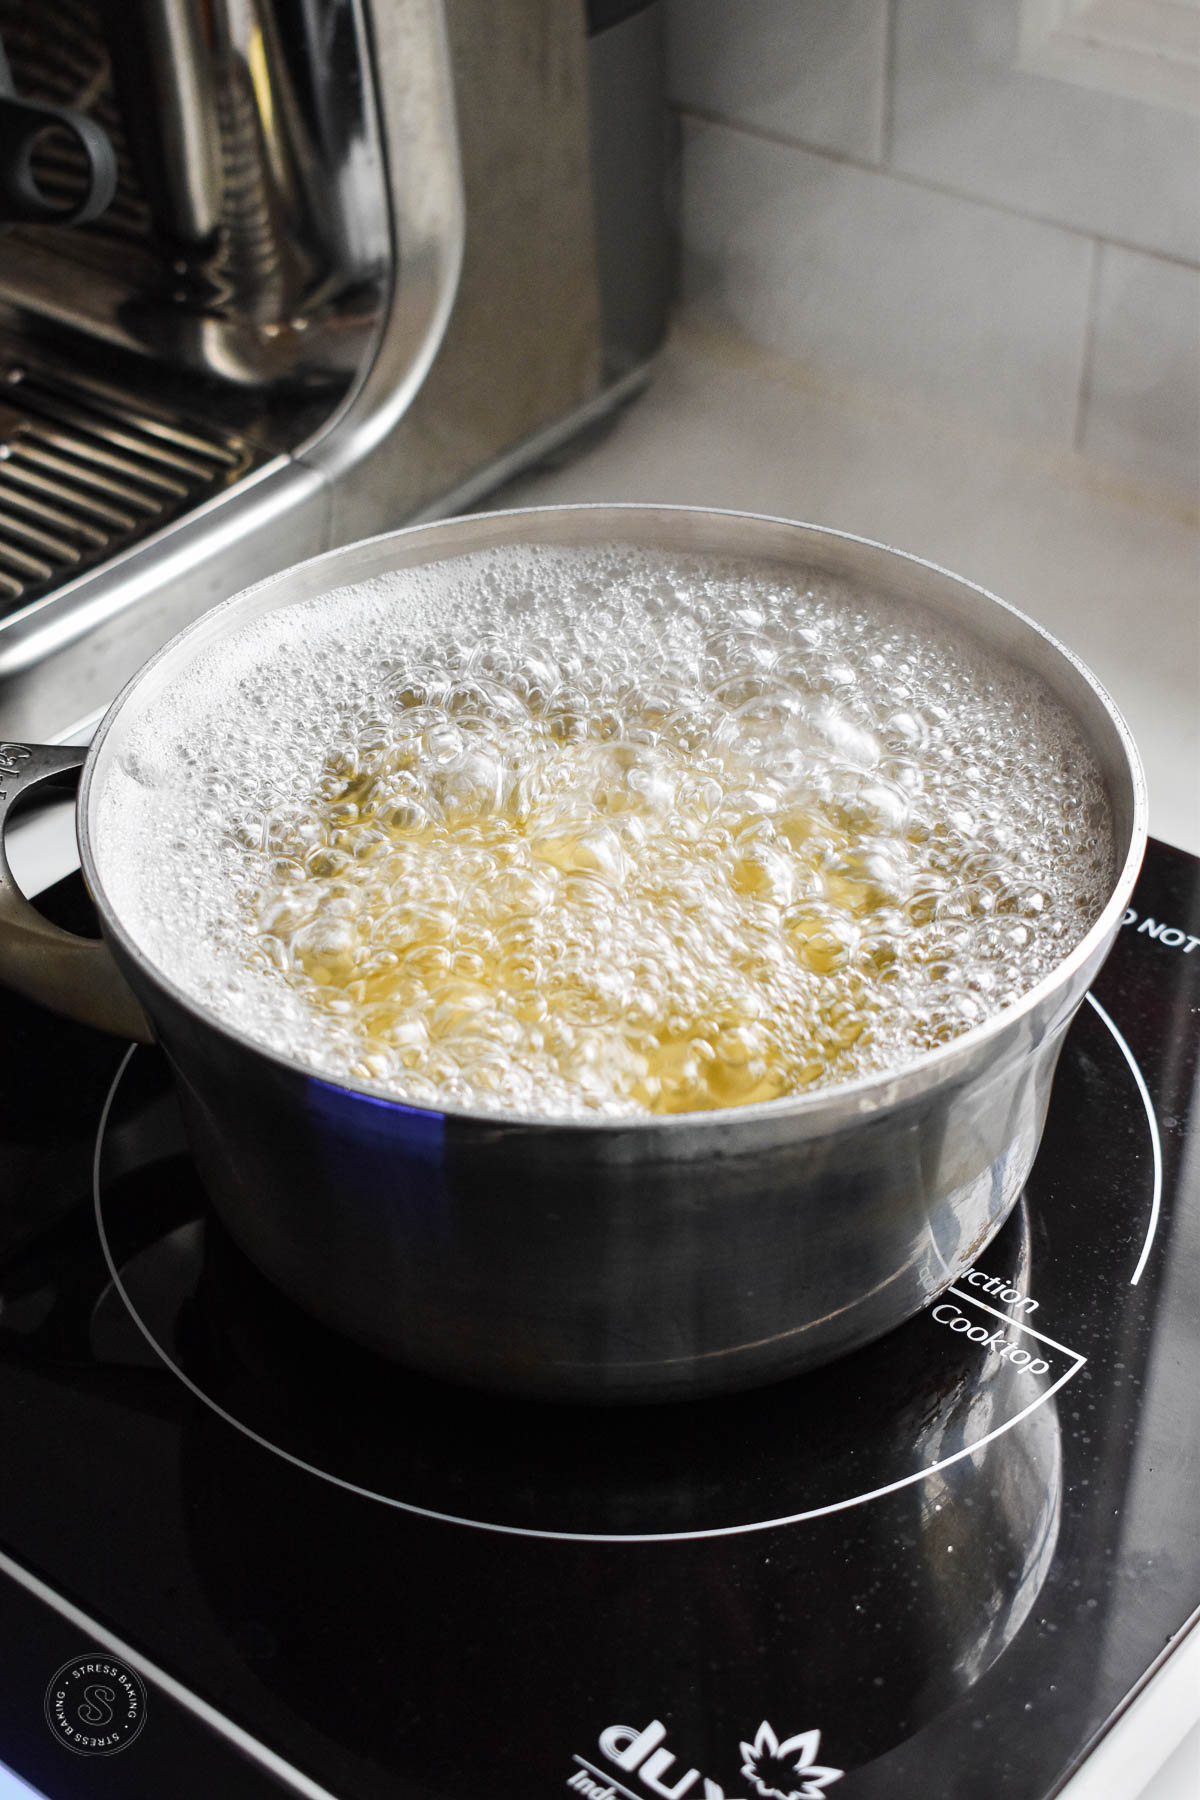 Pasta being boiled in a saucepan